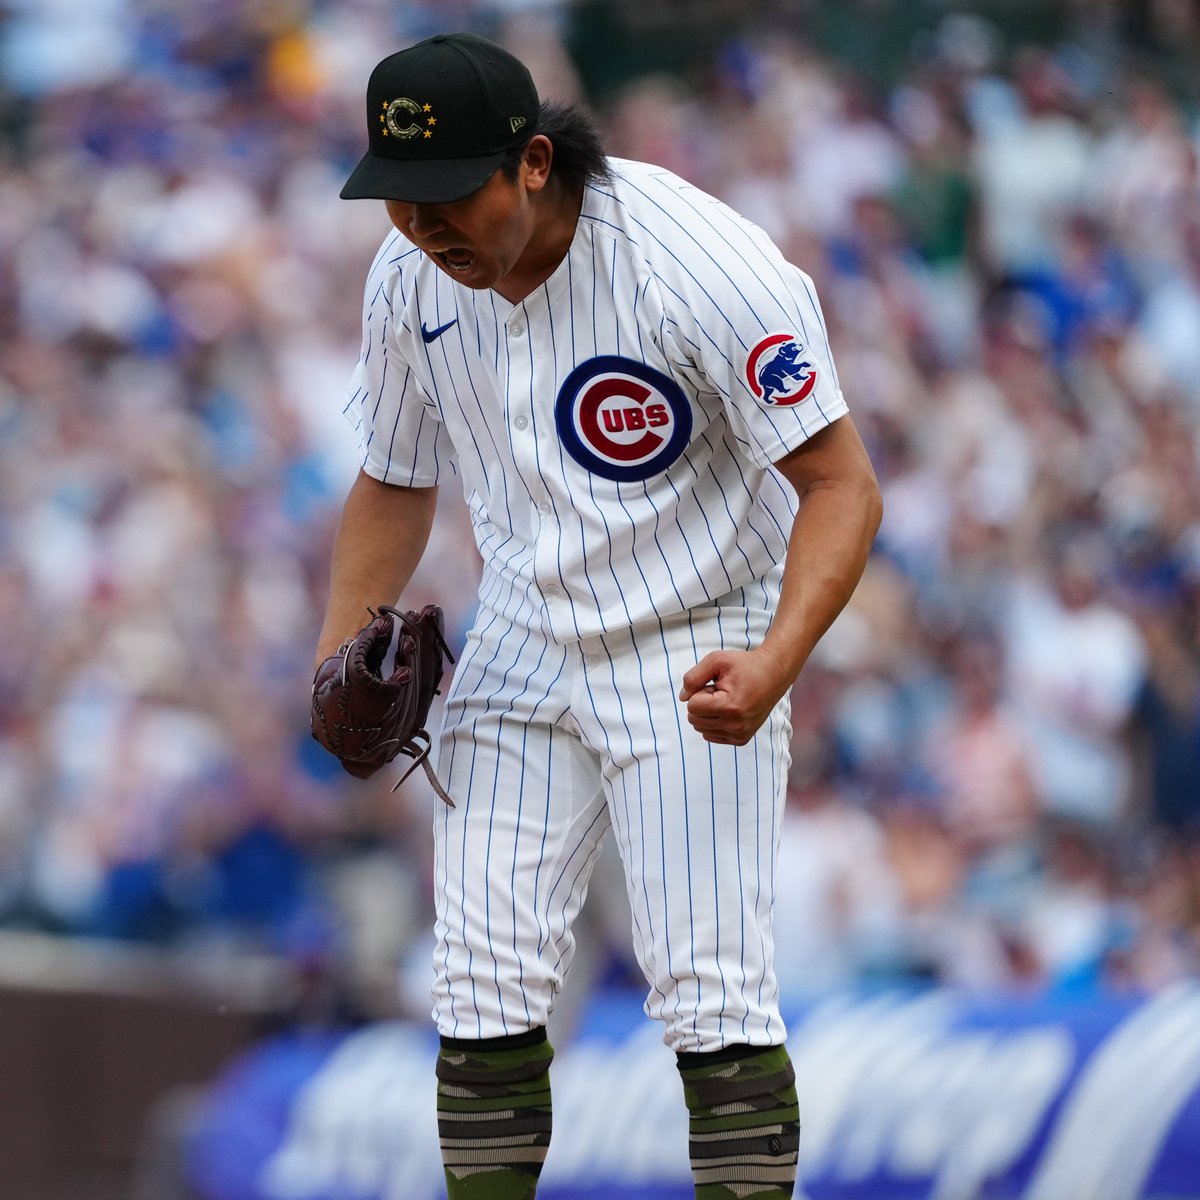 Shota Imanaga's 0.84 ERA is the lowest in a pitcher's first nine career starts in MLB HISTORY 🤩 (h/t @SlangsOnSports)